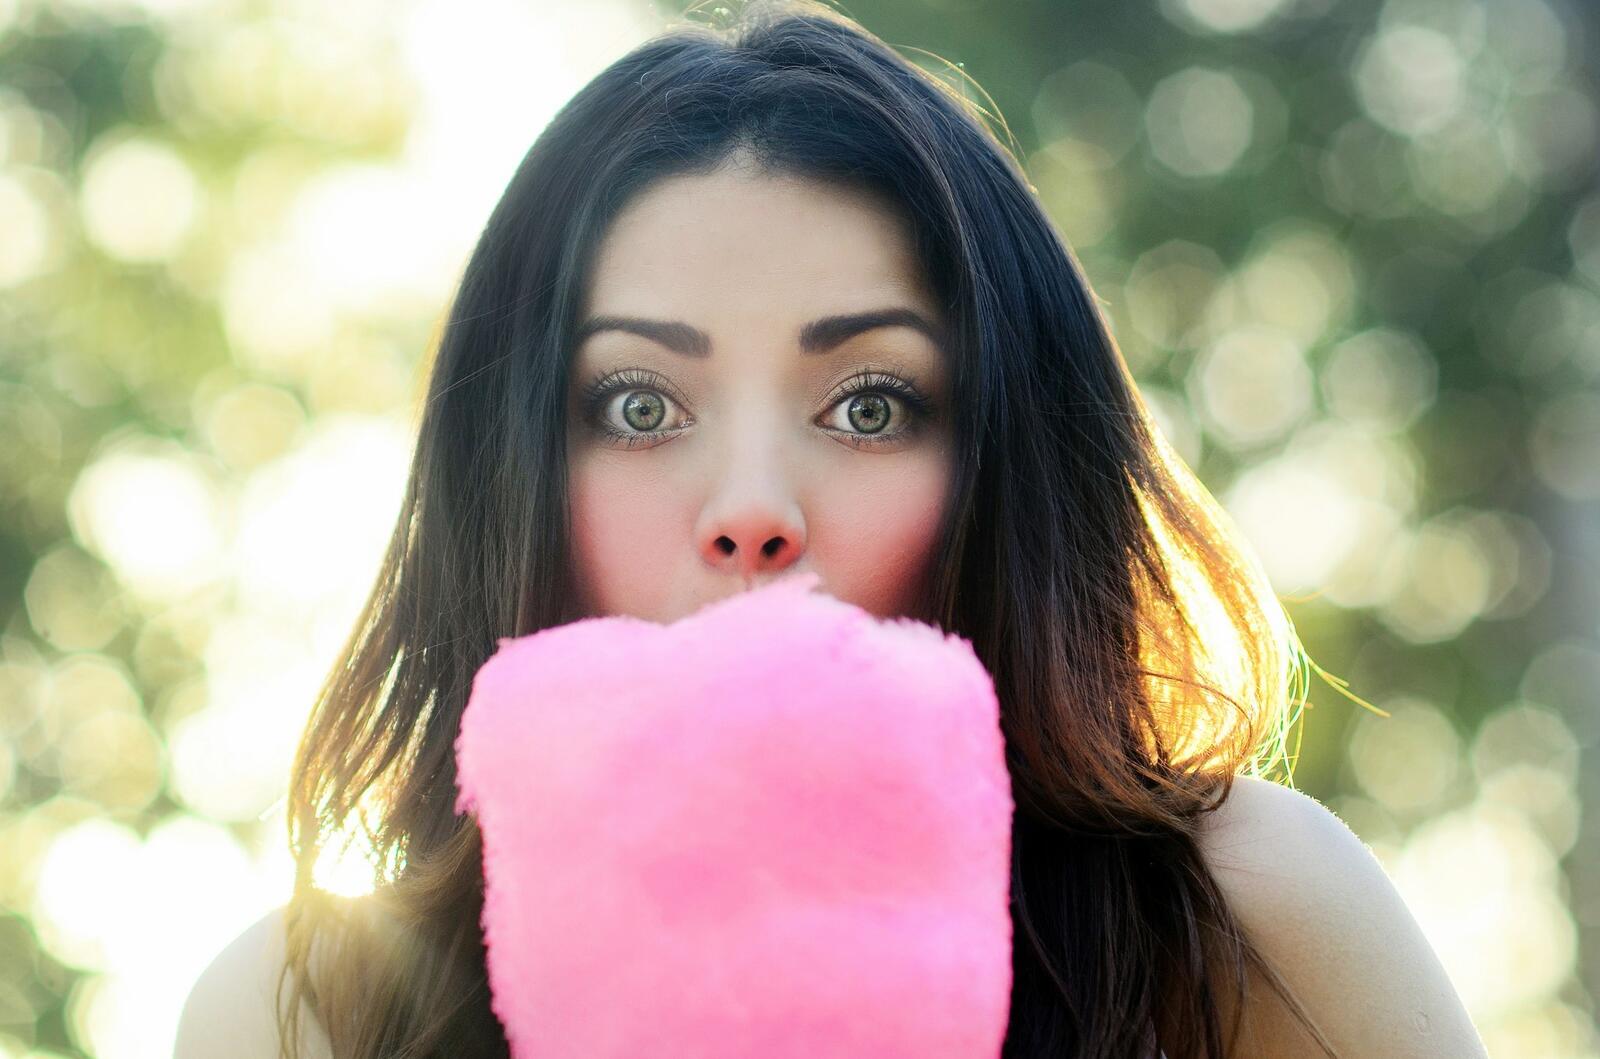 Free photo The girl with the cotton candy